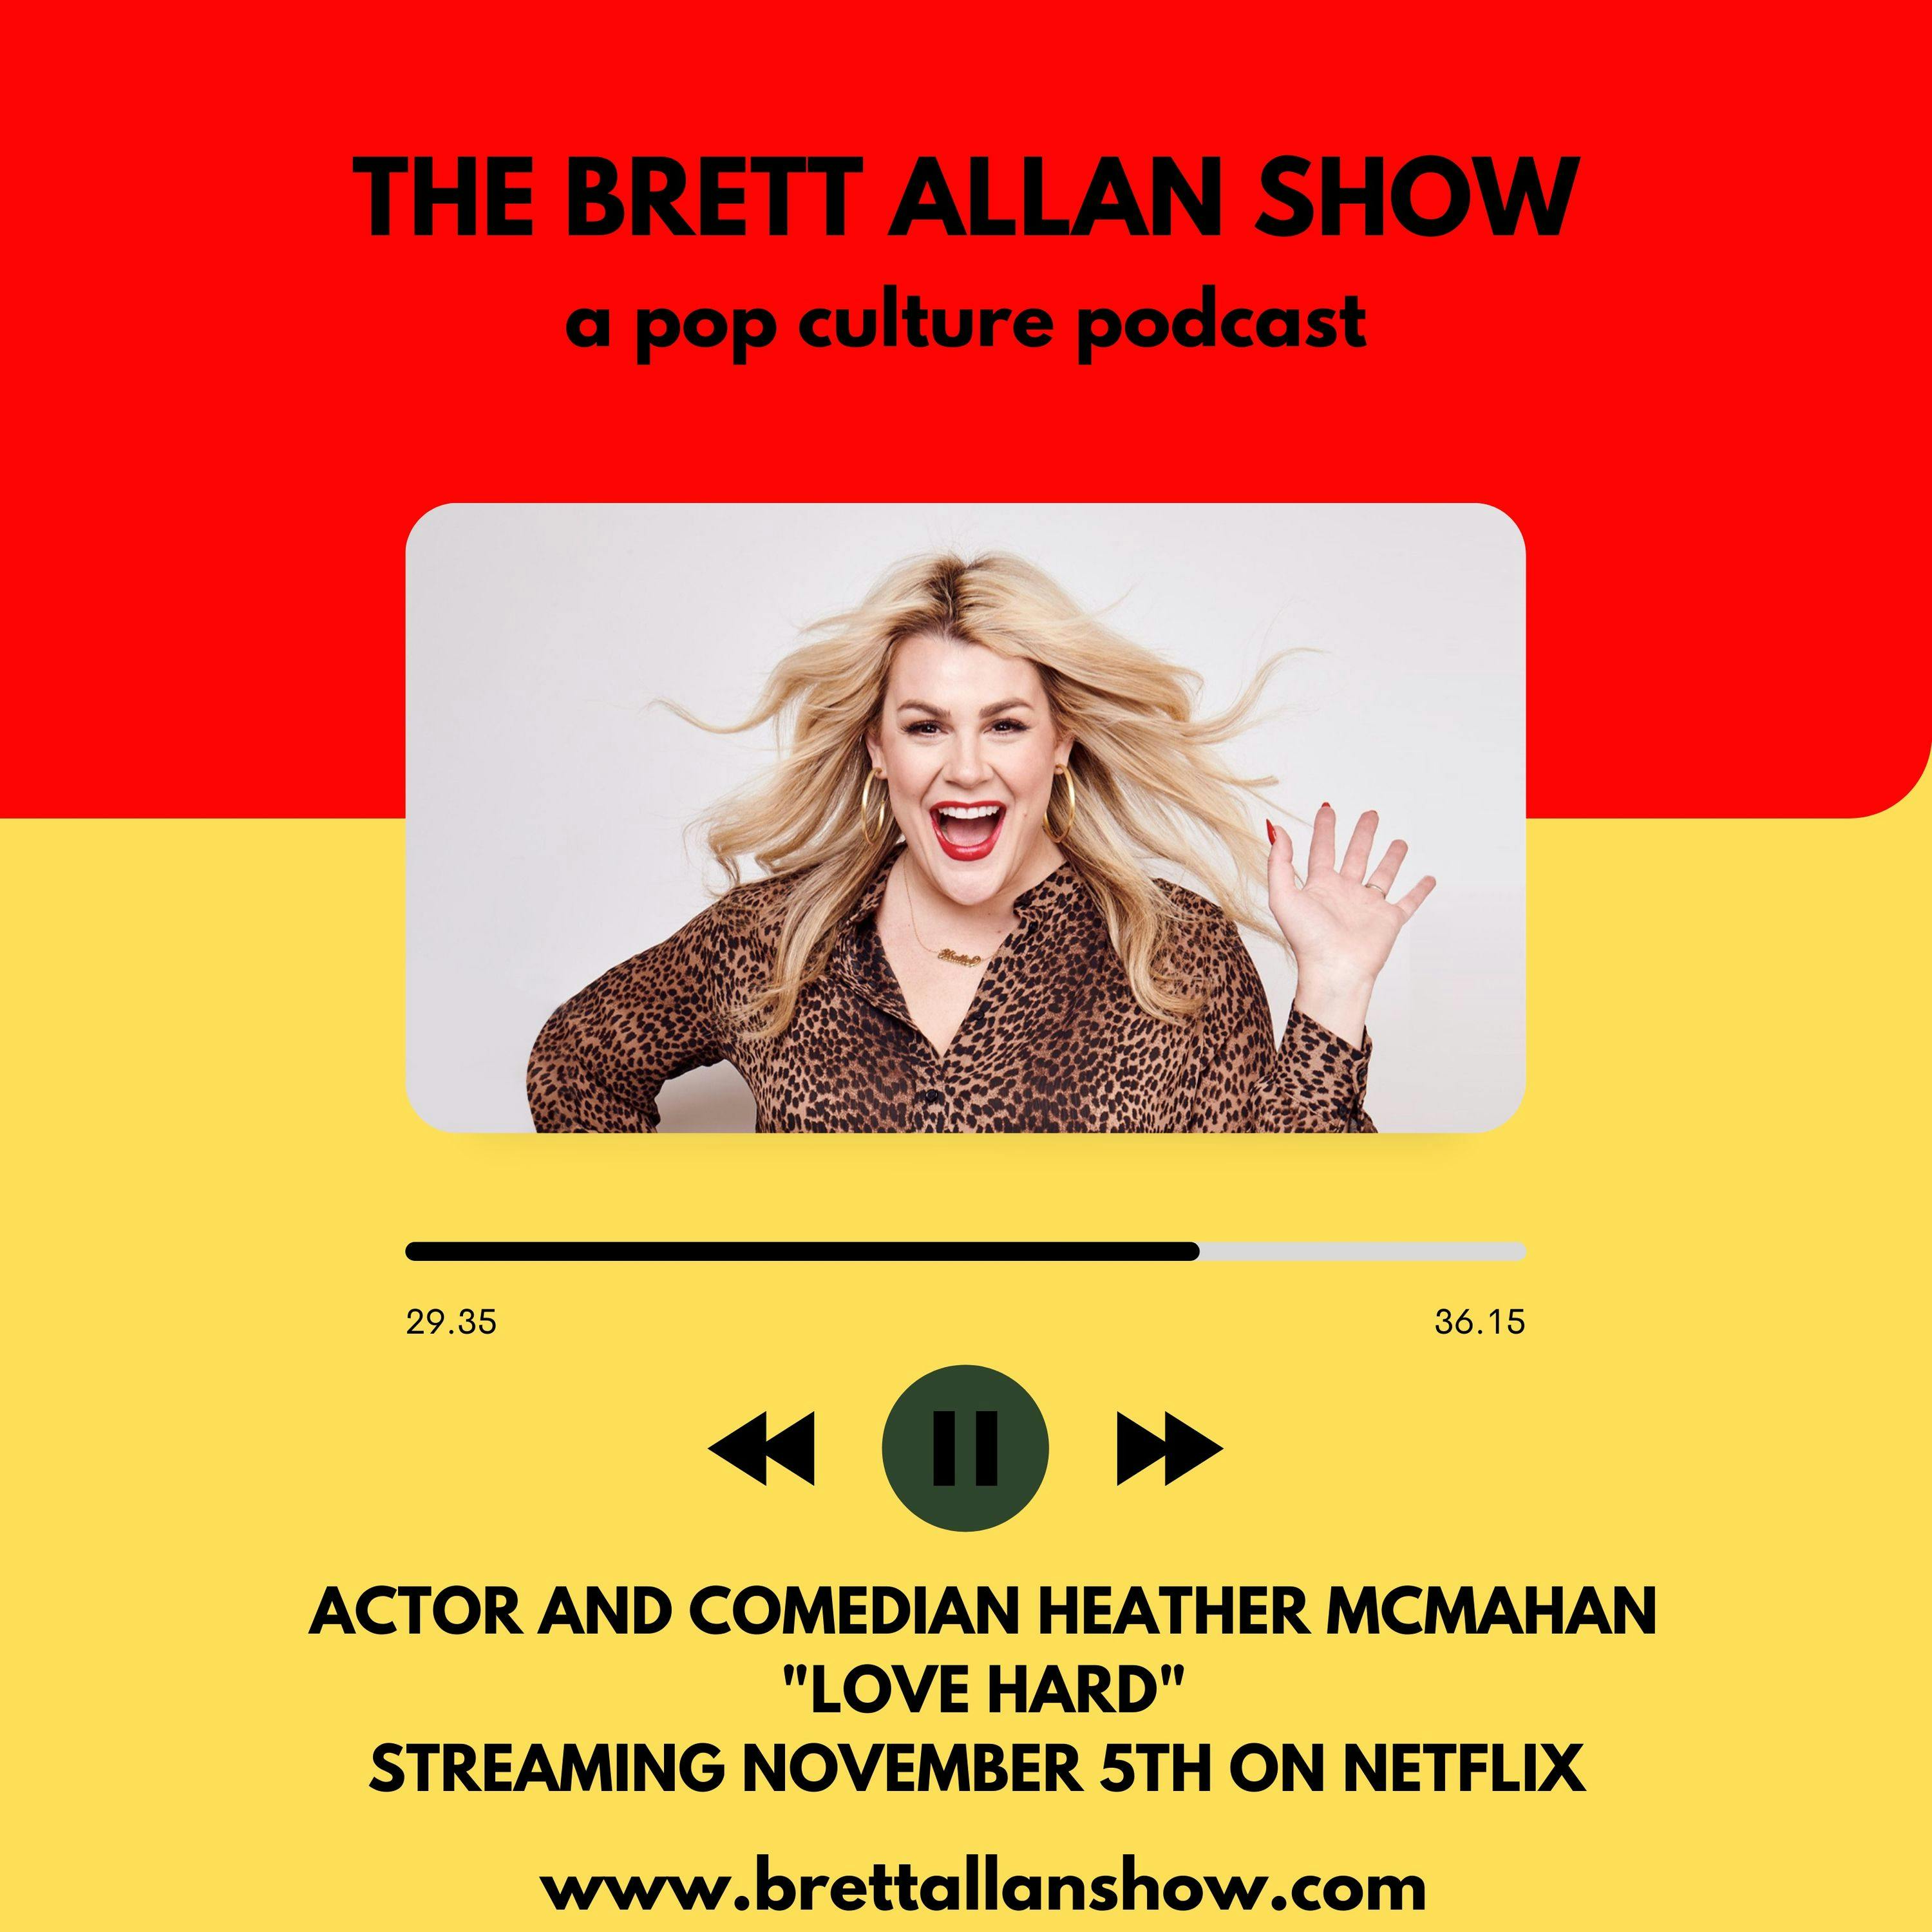 Comedian and Actor Heather McMahan Talks "Love Hard" Streaming November 5th on Netflix and Her New Comedy Tour| "Farewell" Image